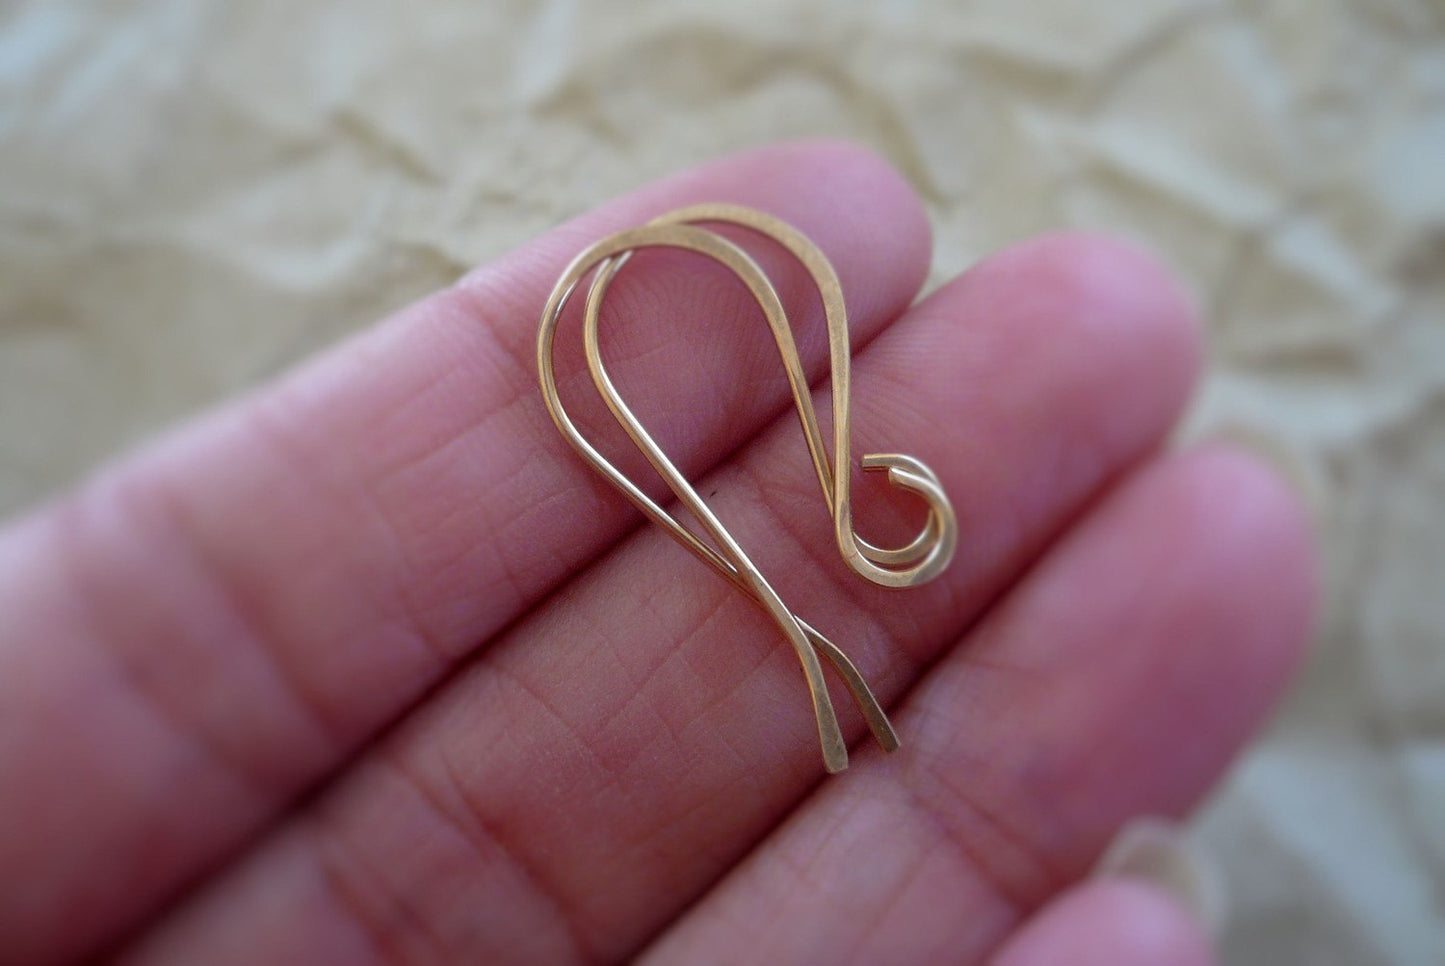 Solitaire 14kt Rose Goldfill Earwires - Handmade. Handforged